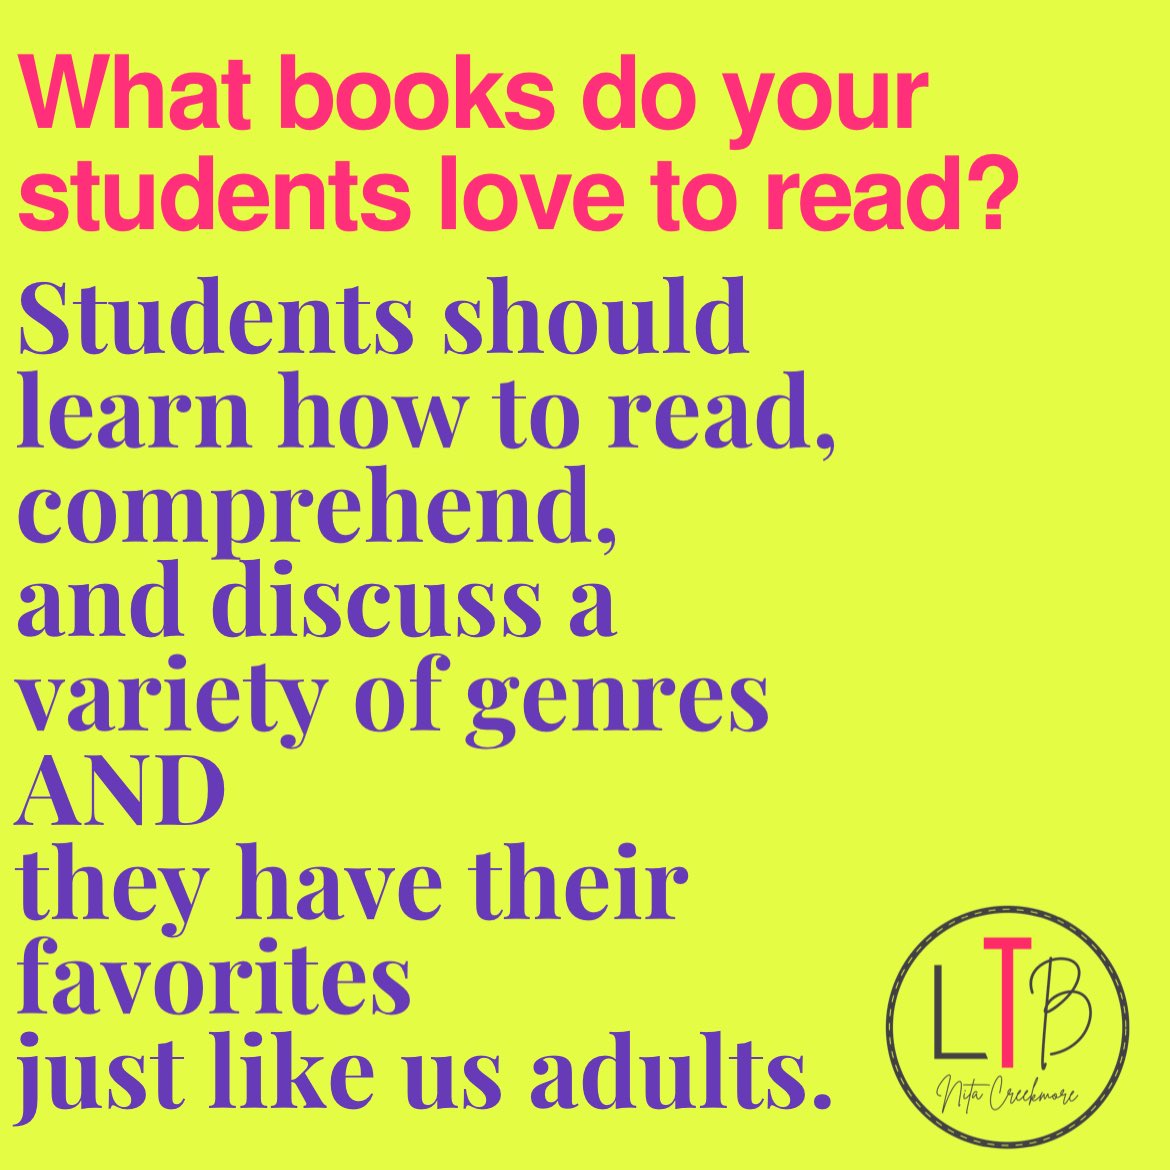 This ⬆️. It’s great to teach them how to read a variety of genres and it’s so important that they read what they love. If you don’t know what they love to read, you can have a reading chat about it! 🫶🏽🙌🏽 What books do your students or child love to read? Share below!